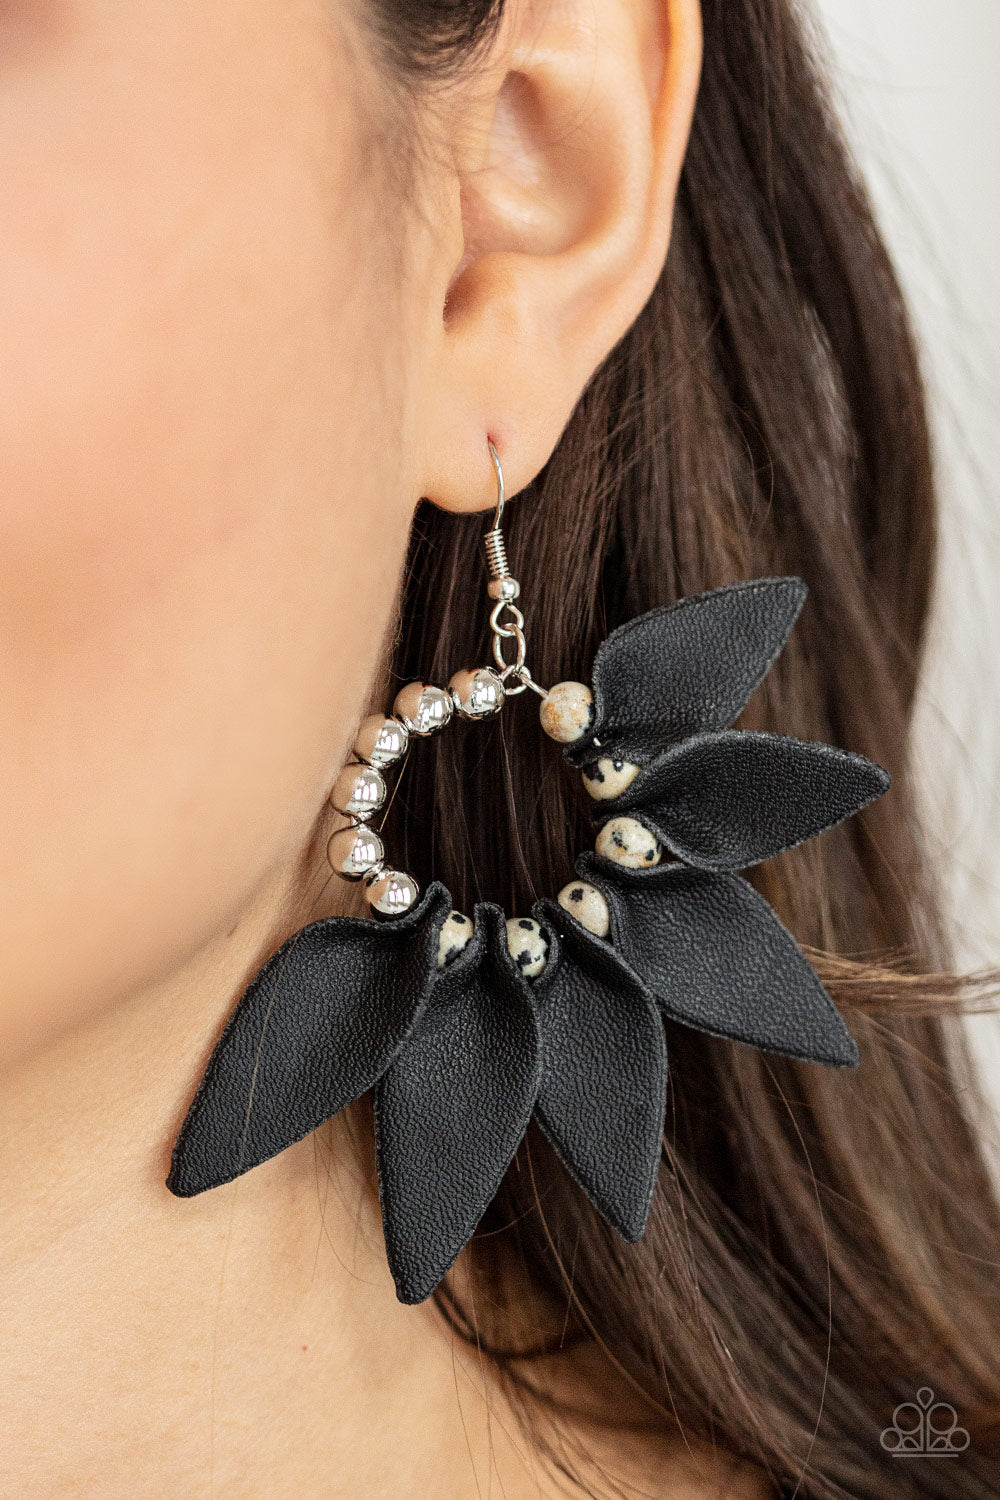 Paparazzi Accessories Flower Child Fever - Black Earrings - Lady T Accessories